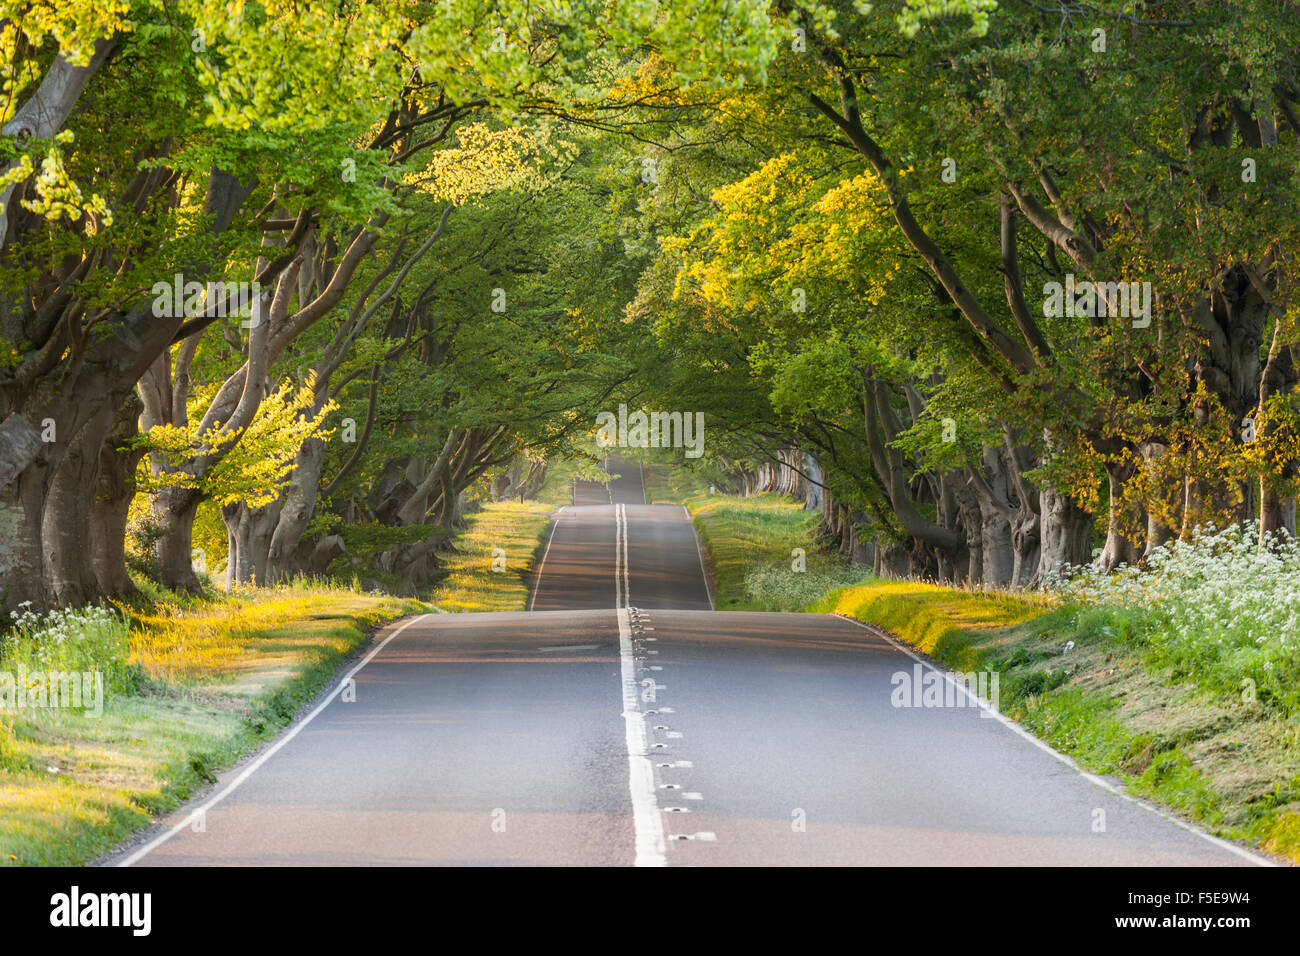 The low evening light through the branches of the beech tree avenue, Kingston Lacy, Dorset, England, United Kingdom, Europe Stock Photo